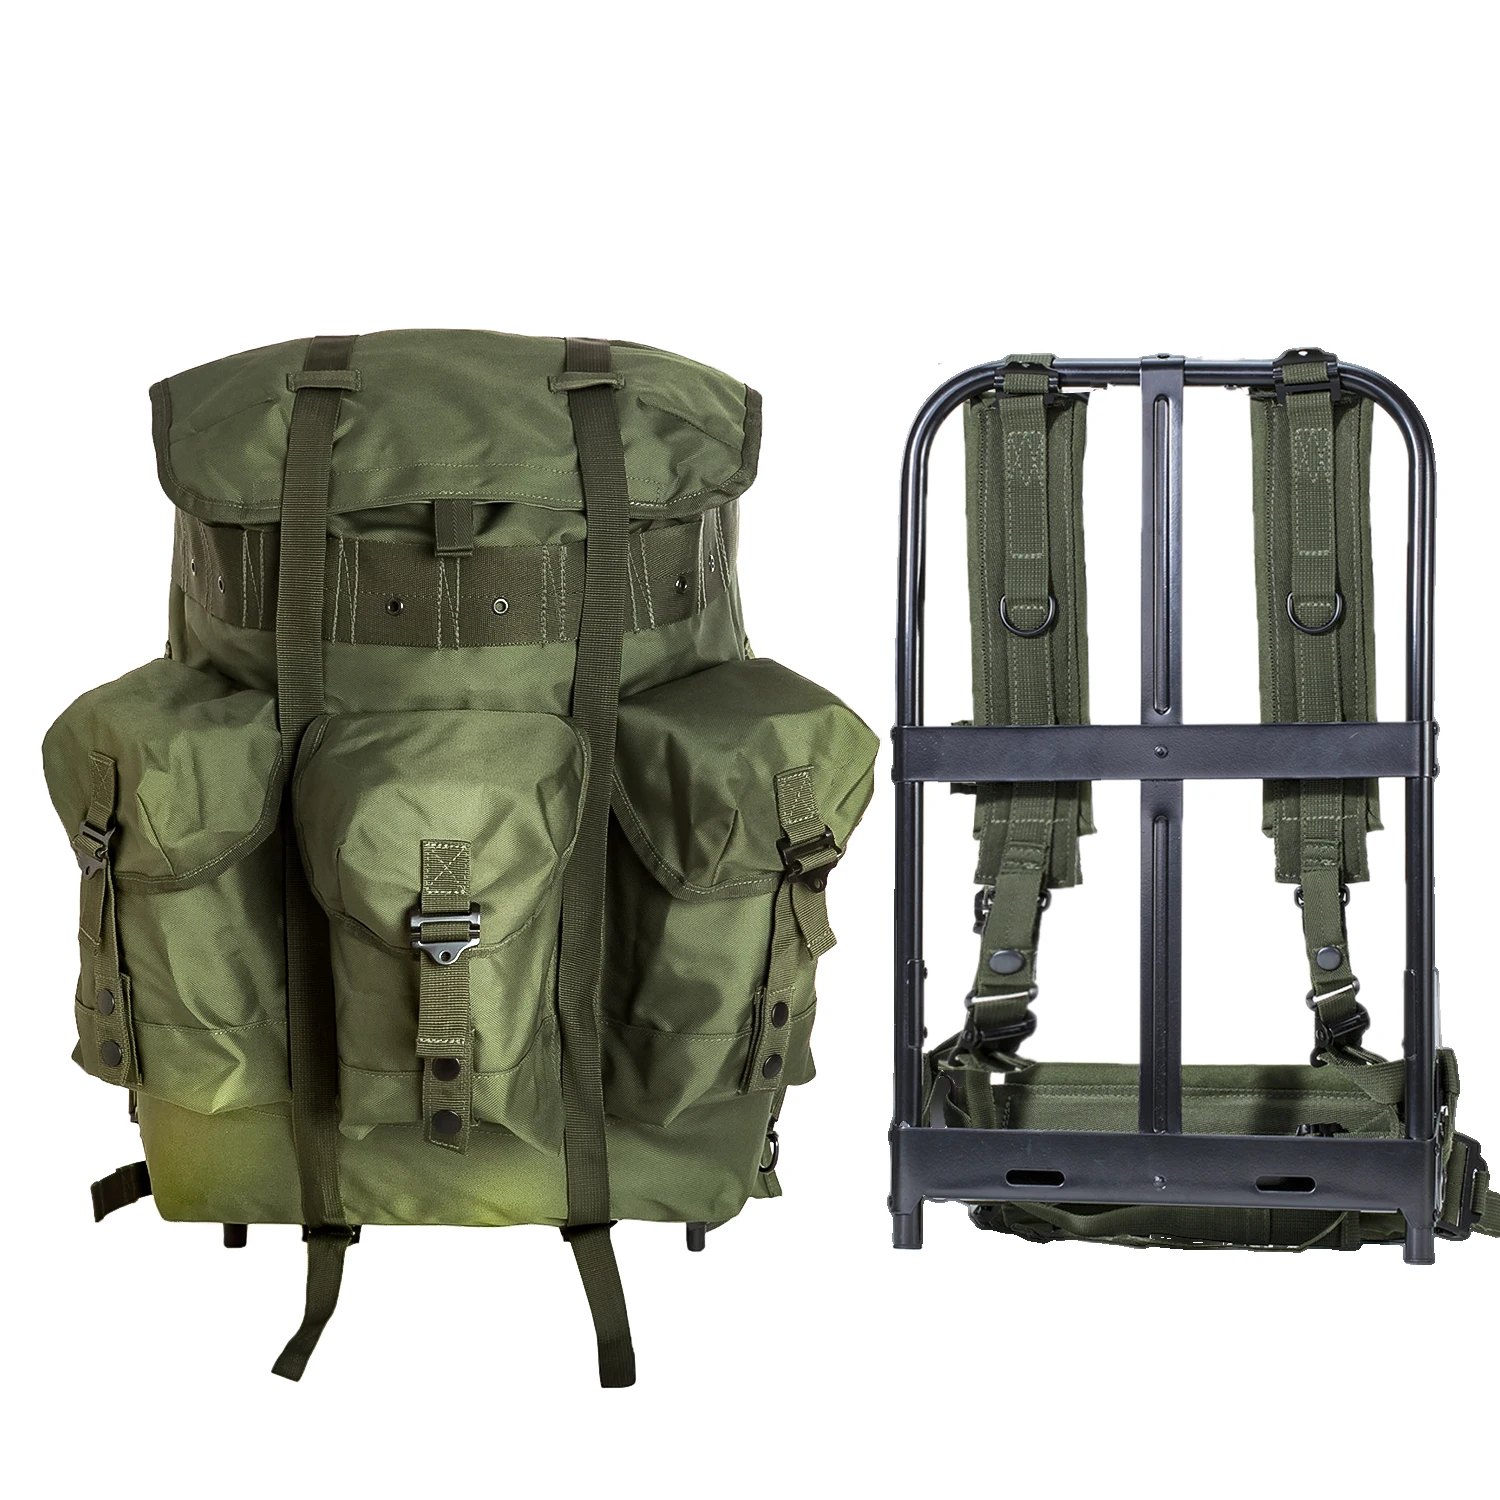 

U.S Military ALICE Backpack A.L.I.C.E. Field Pack Medium Size Army Olive Drab, Oliver drab